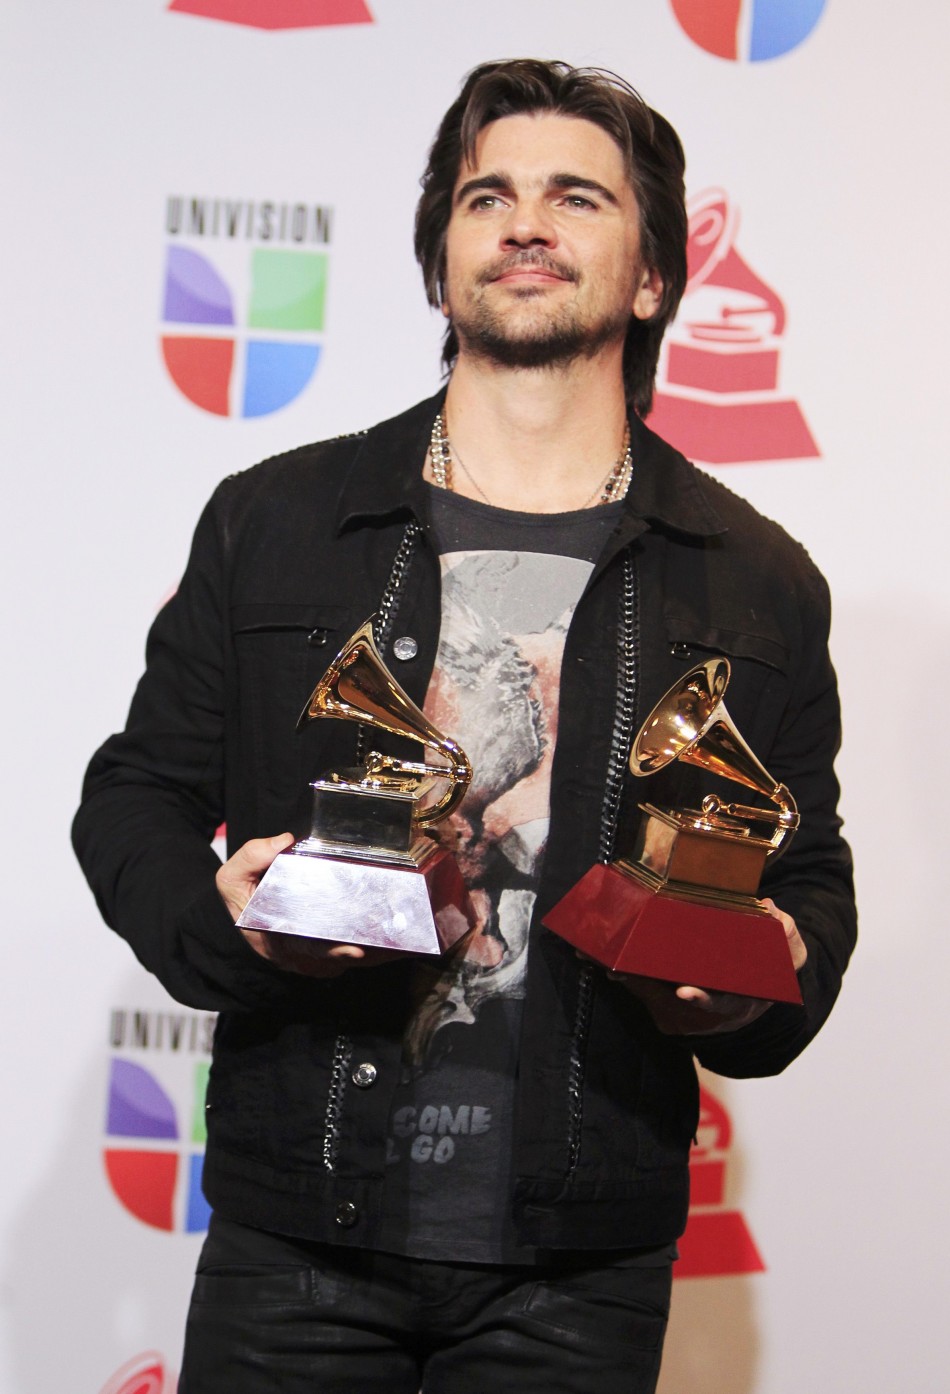 Juanes poses with awards for best long form music video and album of the year for MTV Unplugged during the 13th Latin Grammy Awards in Las Vegas